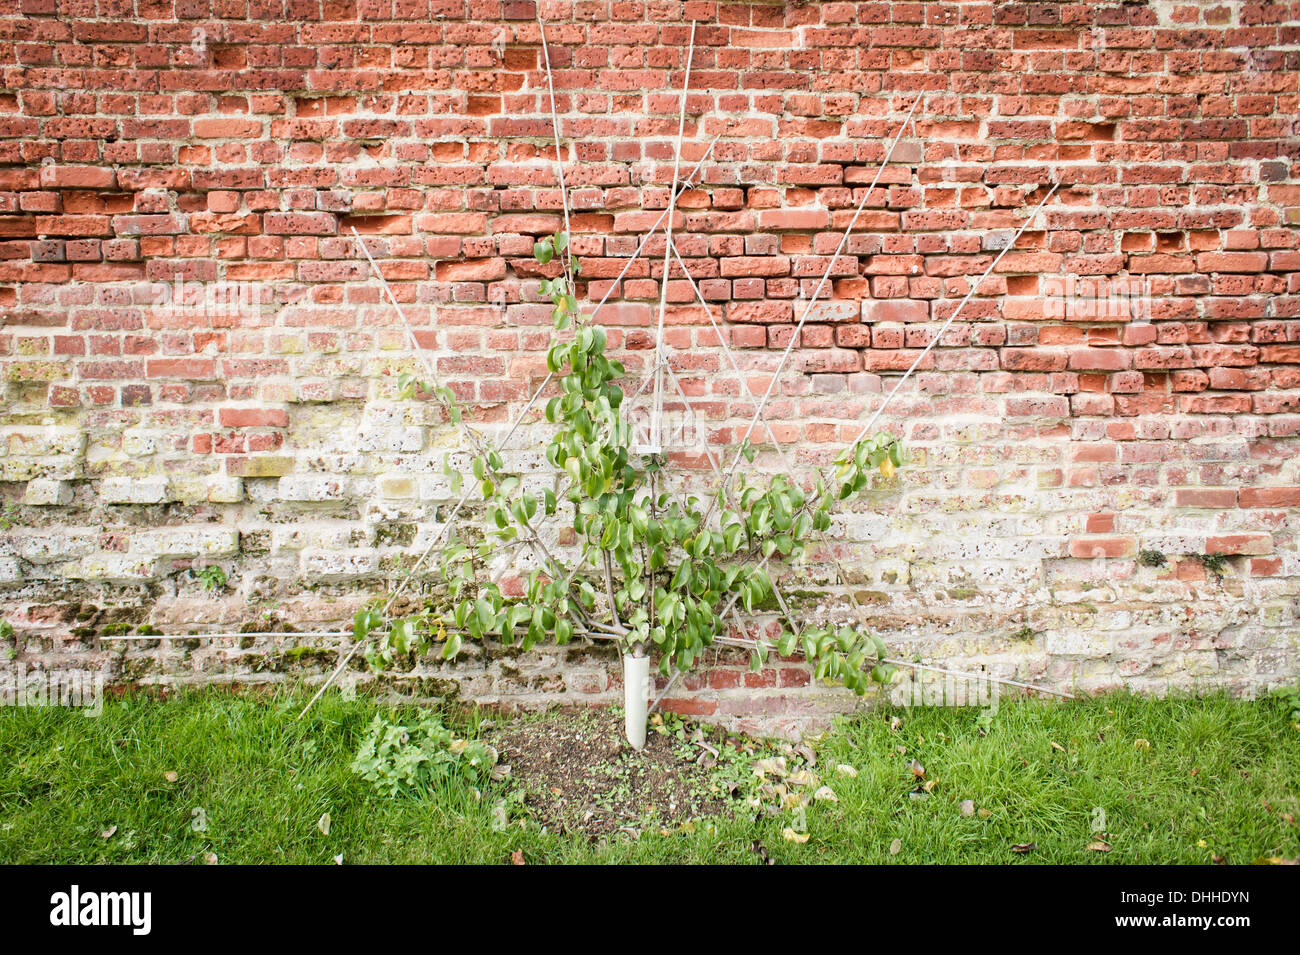 A baby pear tree growing against a red brick wall Stock Photo